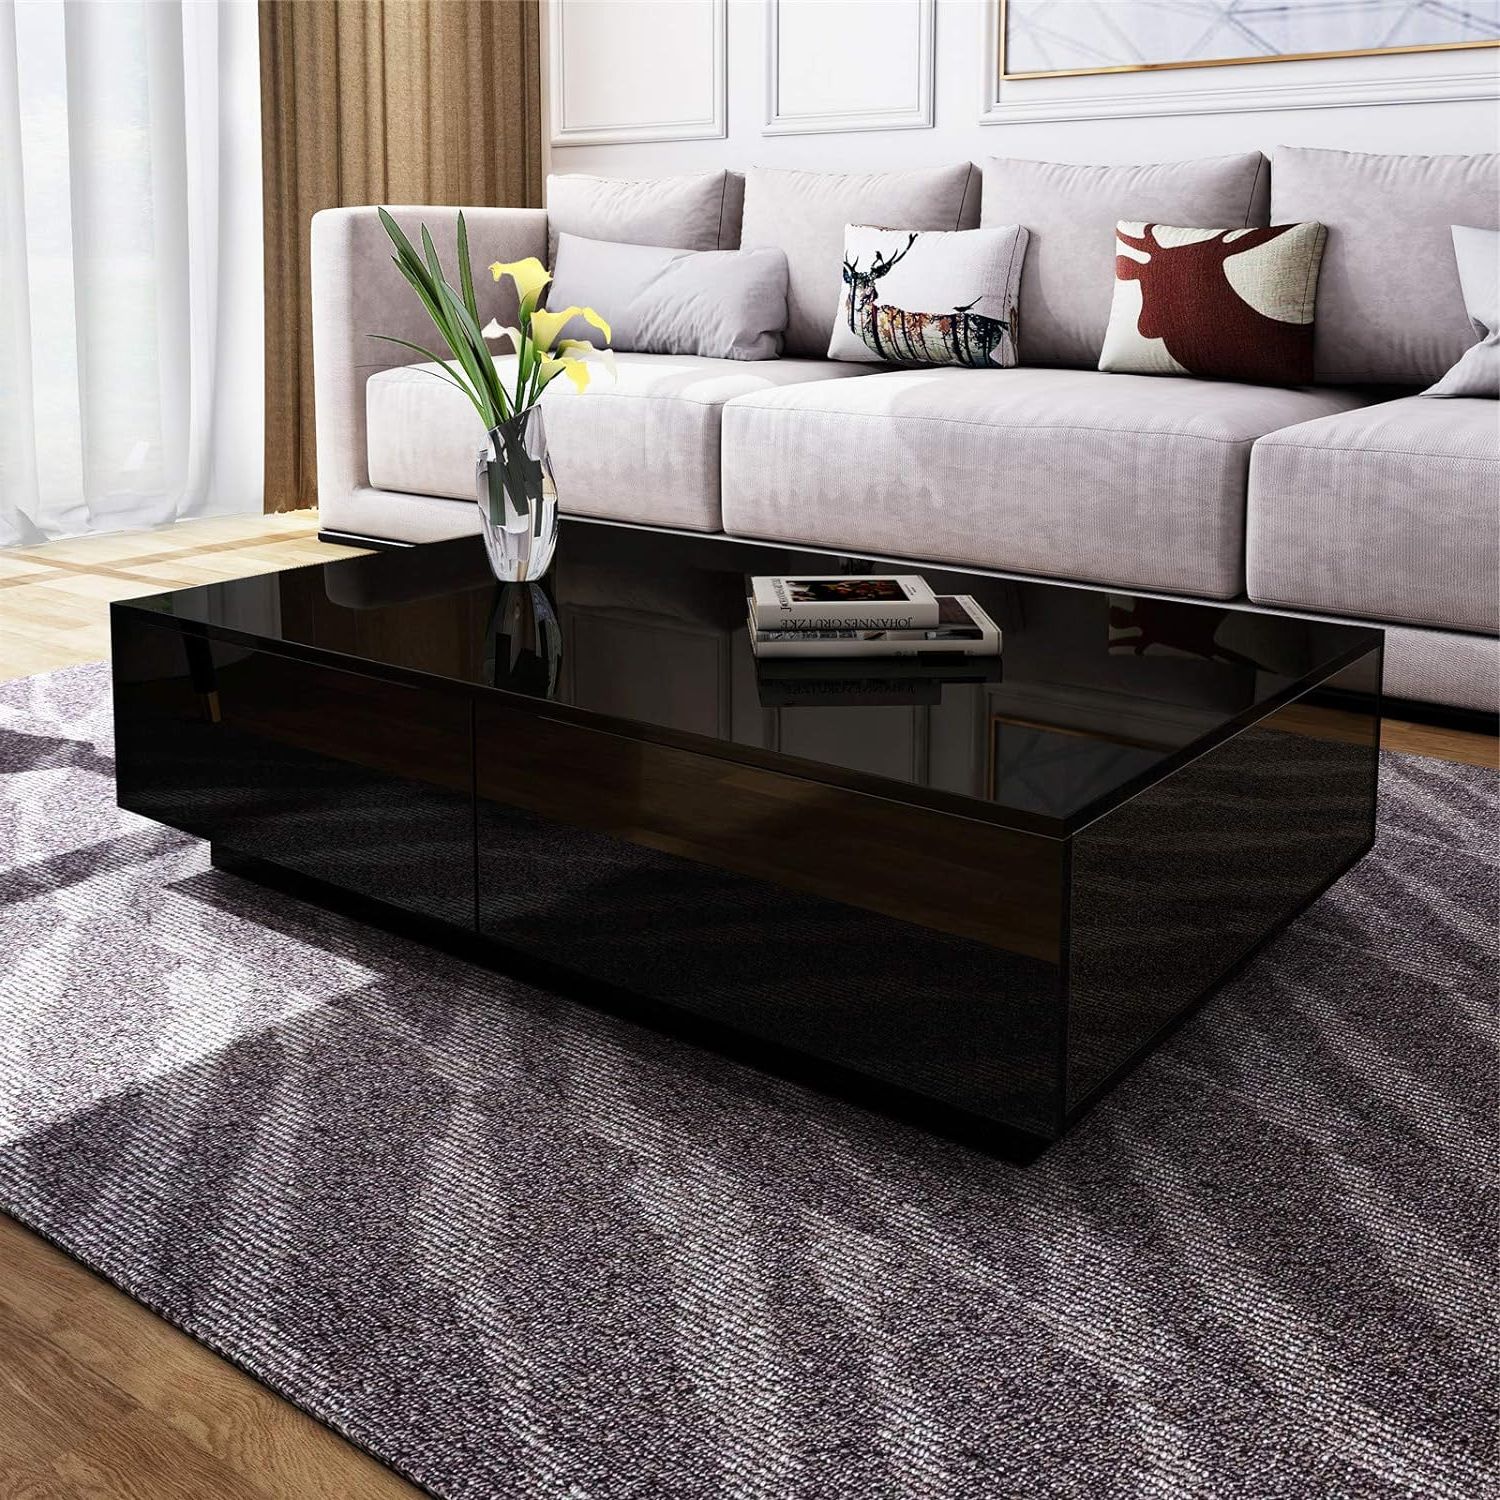 High Gloss Black Coffee Tables Pertaining To Most Current Modern Rectangle Coffee Tea Table High Gloss Coffee Table With  (View 2 of 15)